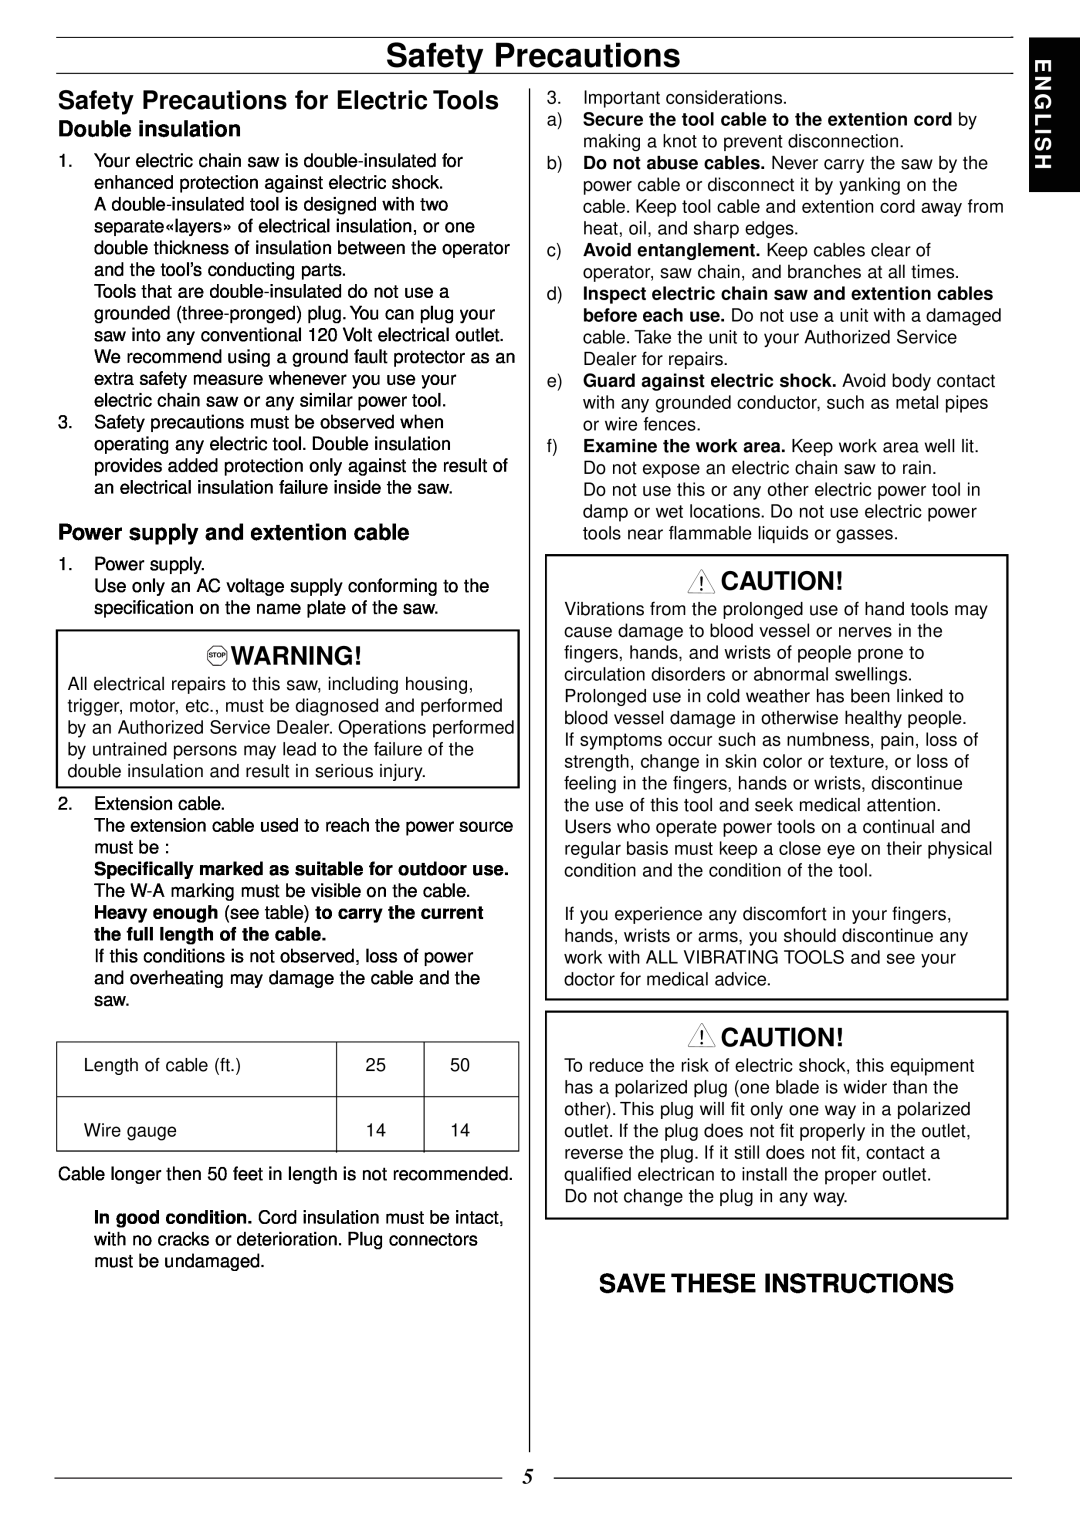 Jonsered 2116 EL Safety Precautions for Electric Tools, Save These Instructions, Double insulation, Glish, Stop Warning 